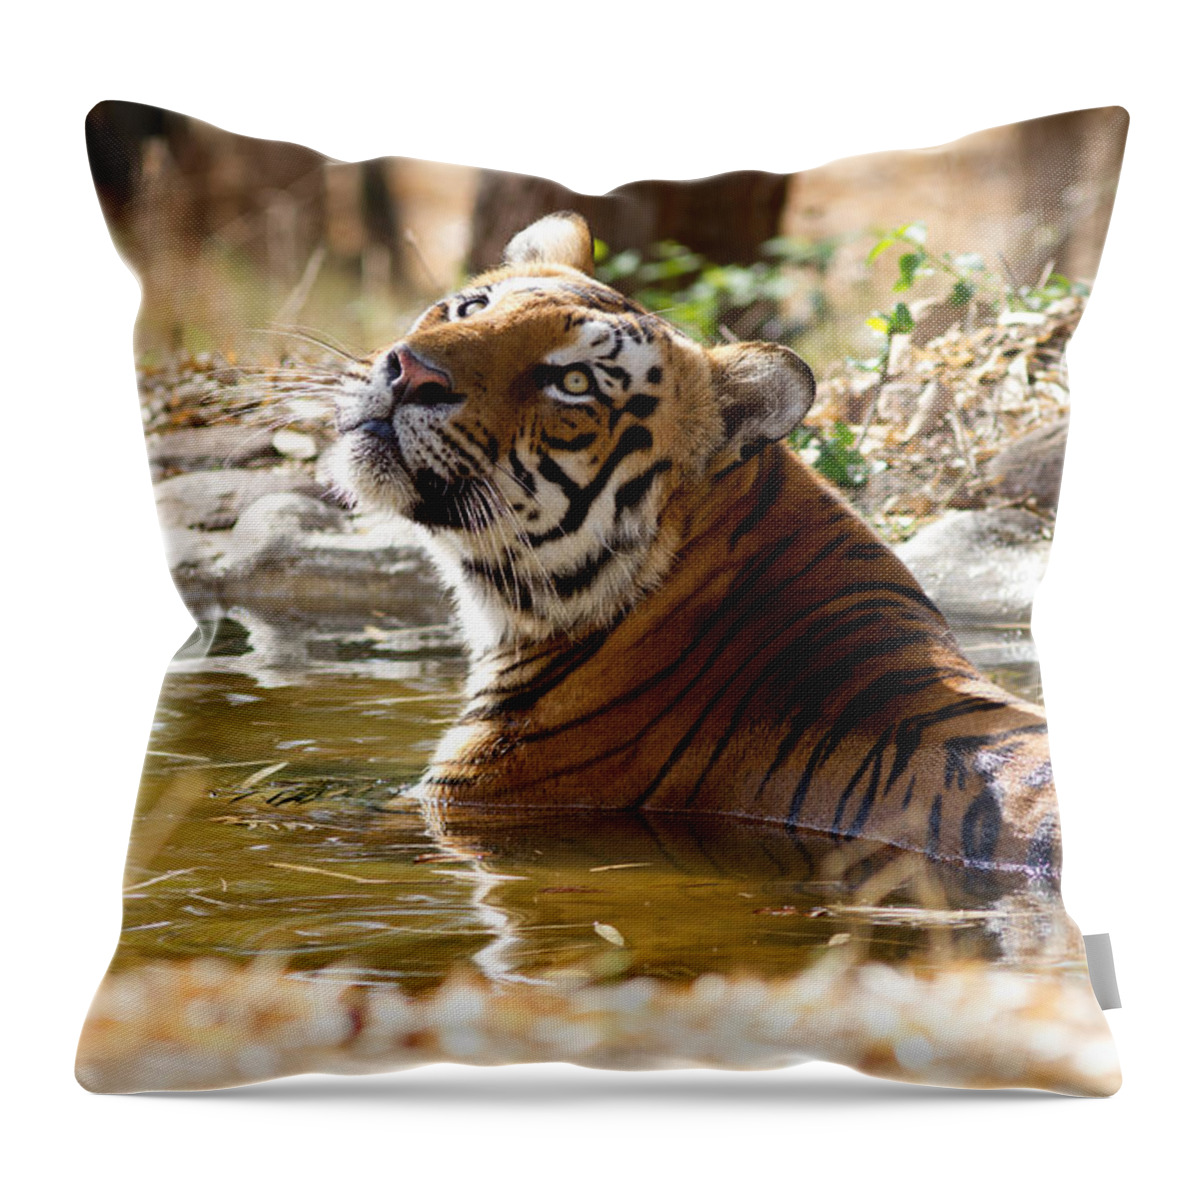 Wildcat Throw Pillow featuring the photograph The Thinker by Ramabhadran Thirupattur